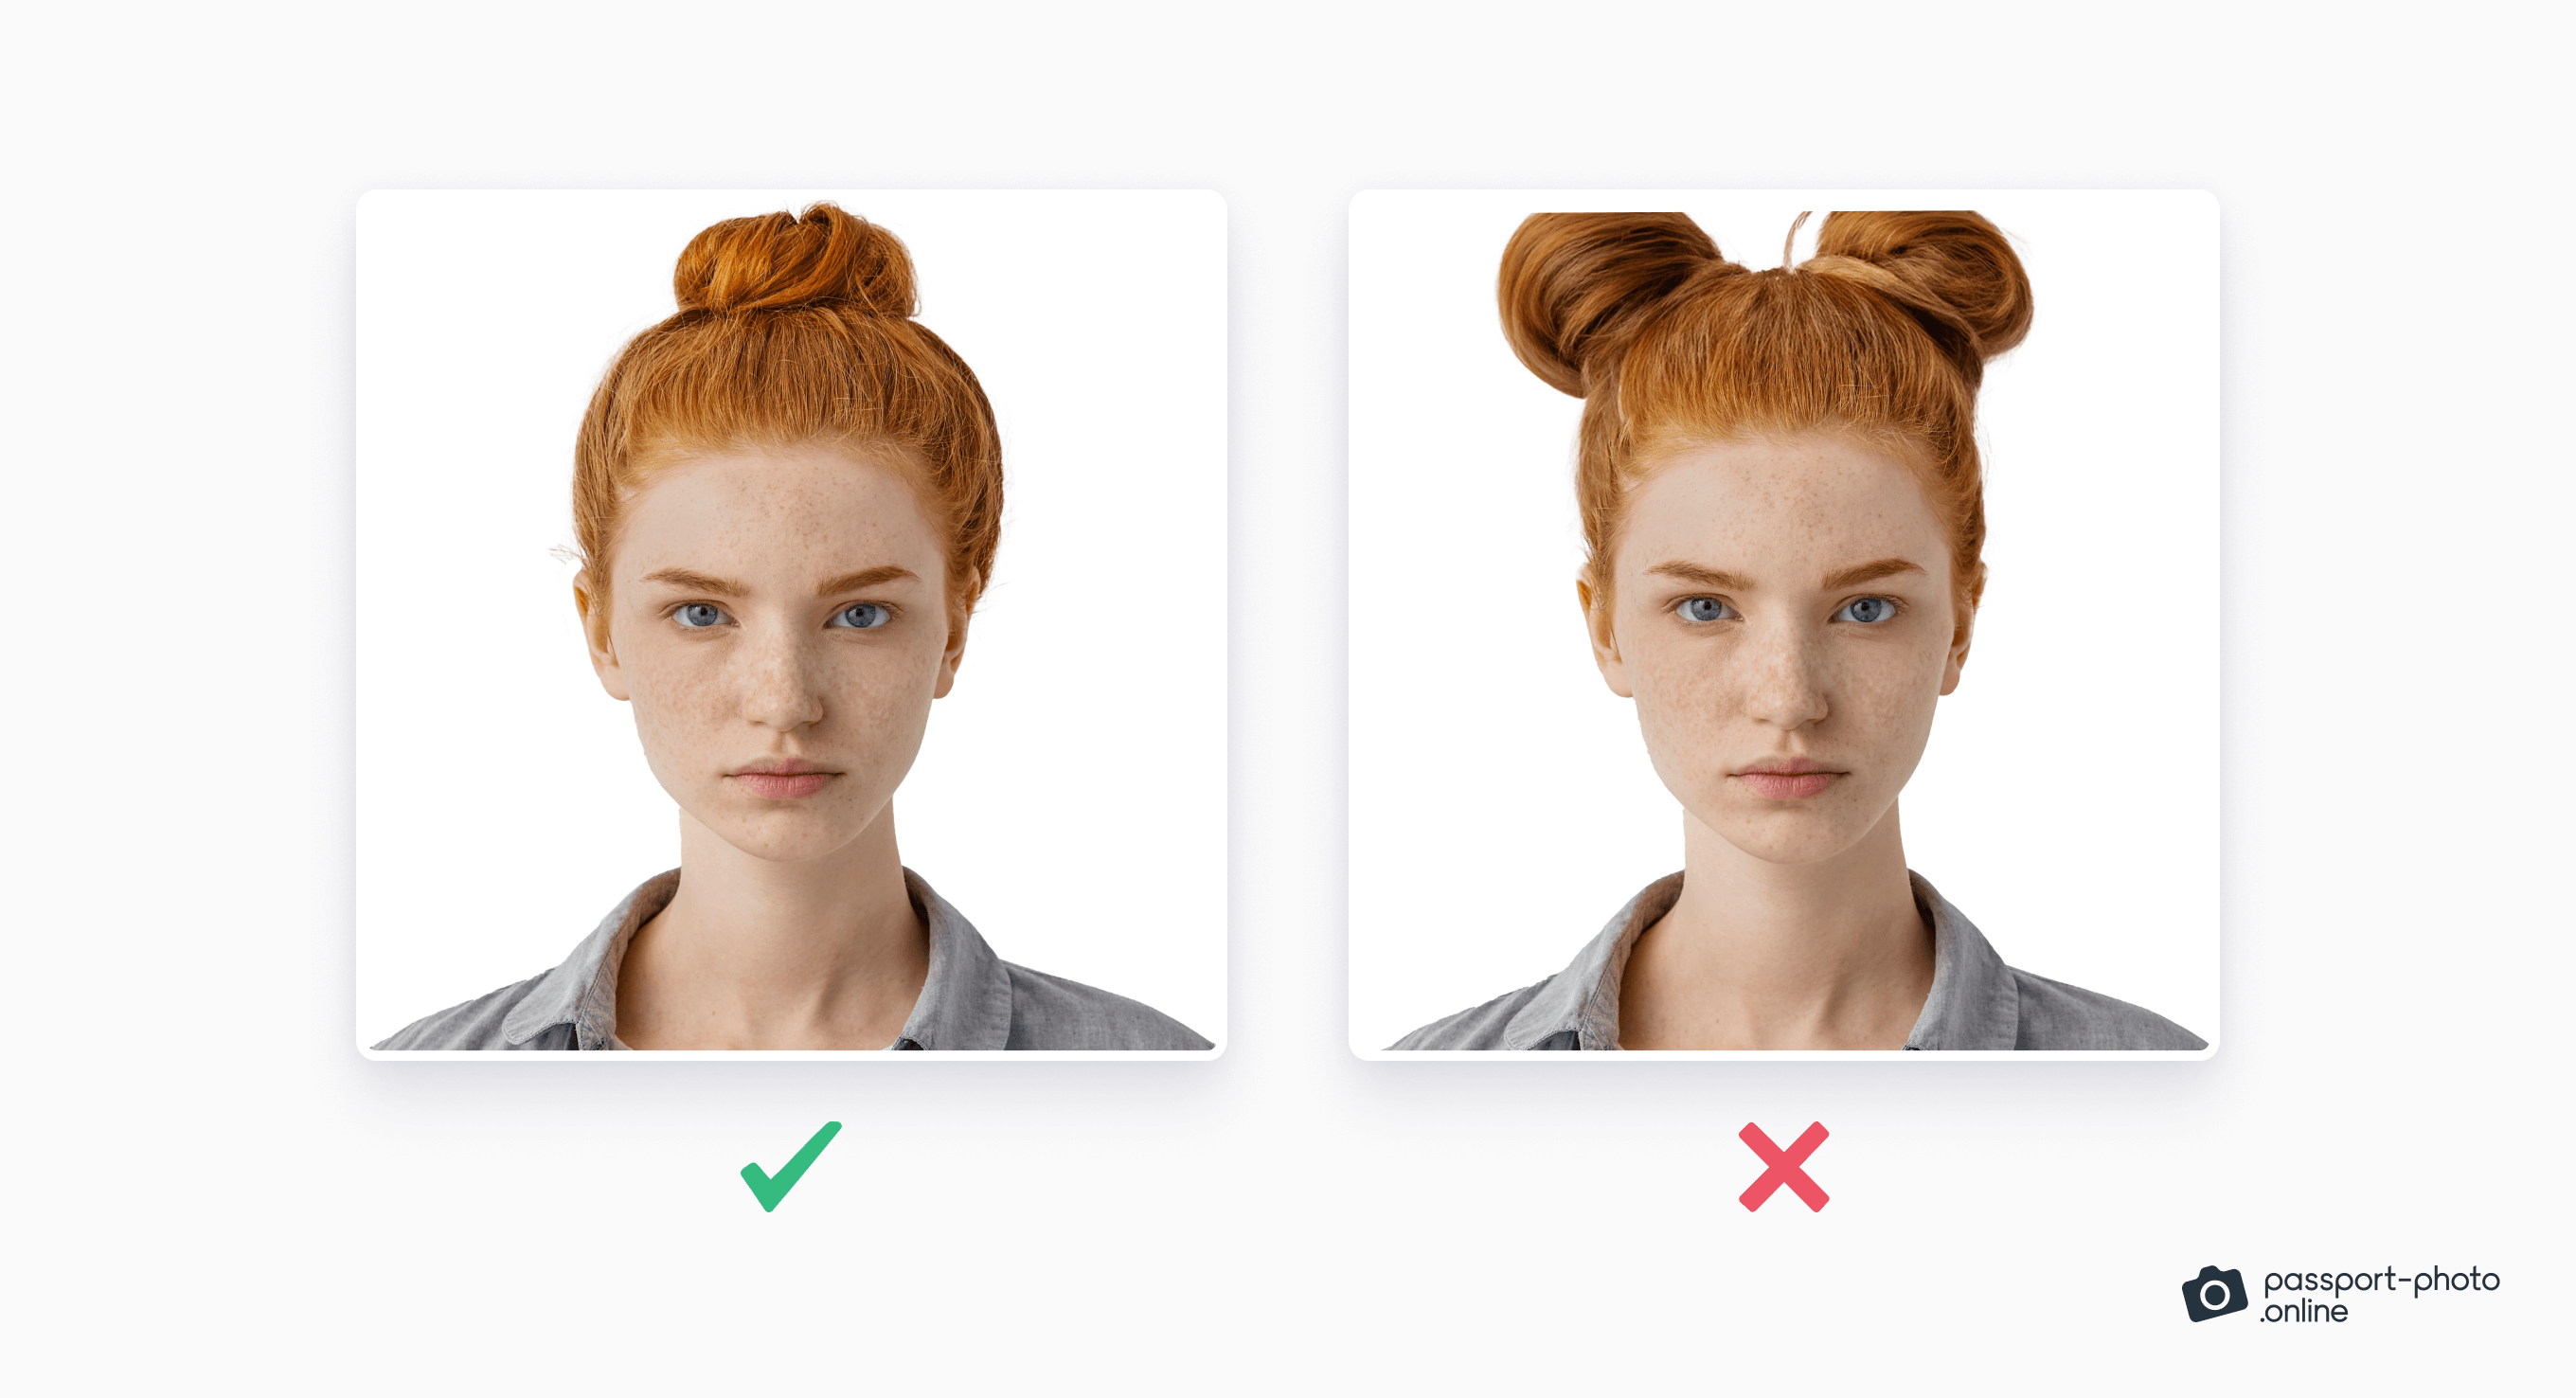 Examples of acceptable and unacceptable updo in a passport photo.